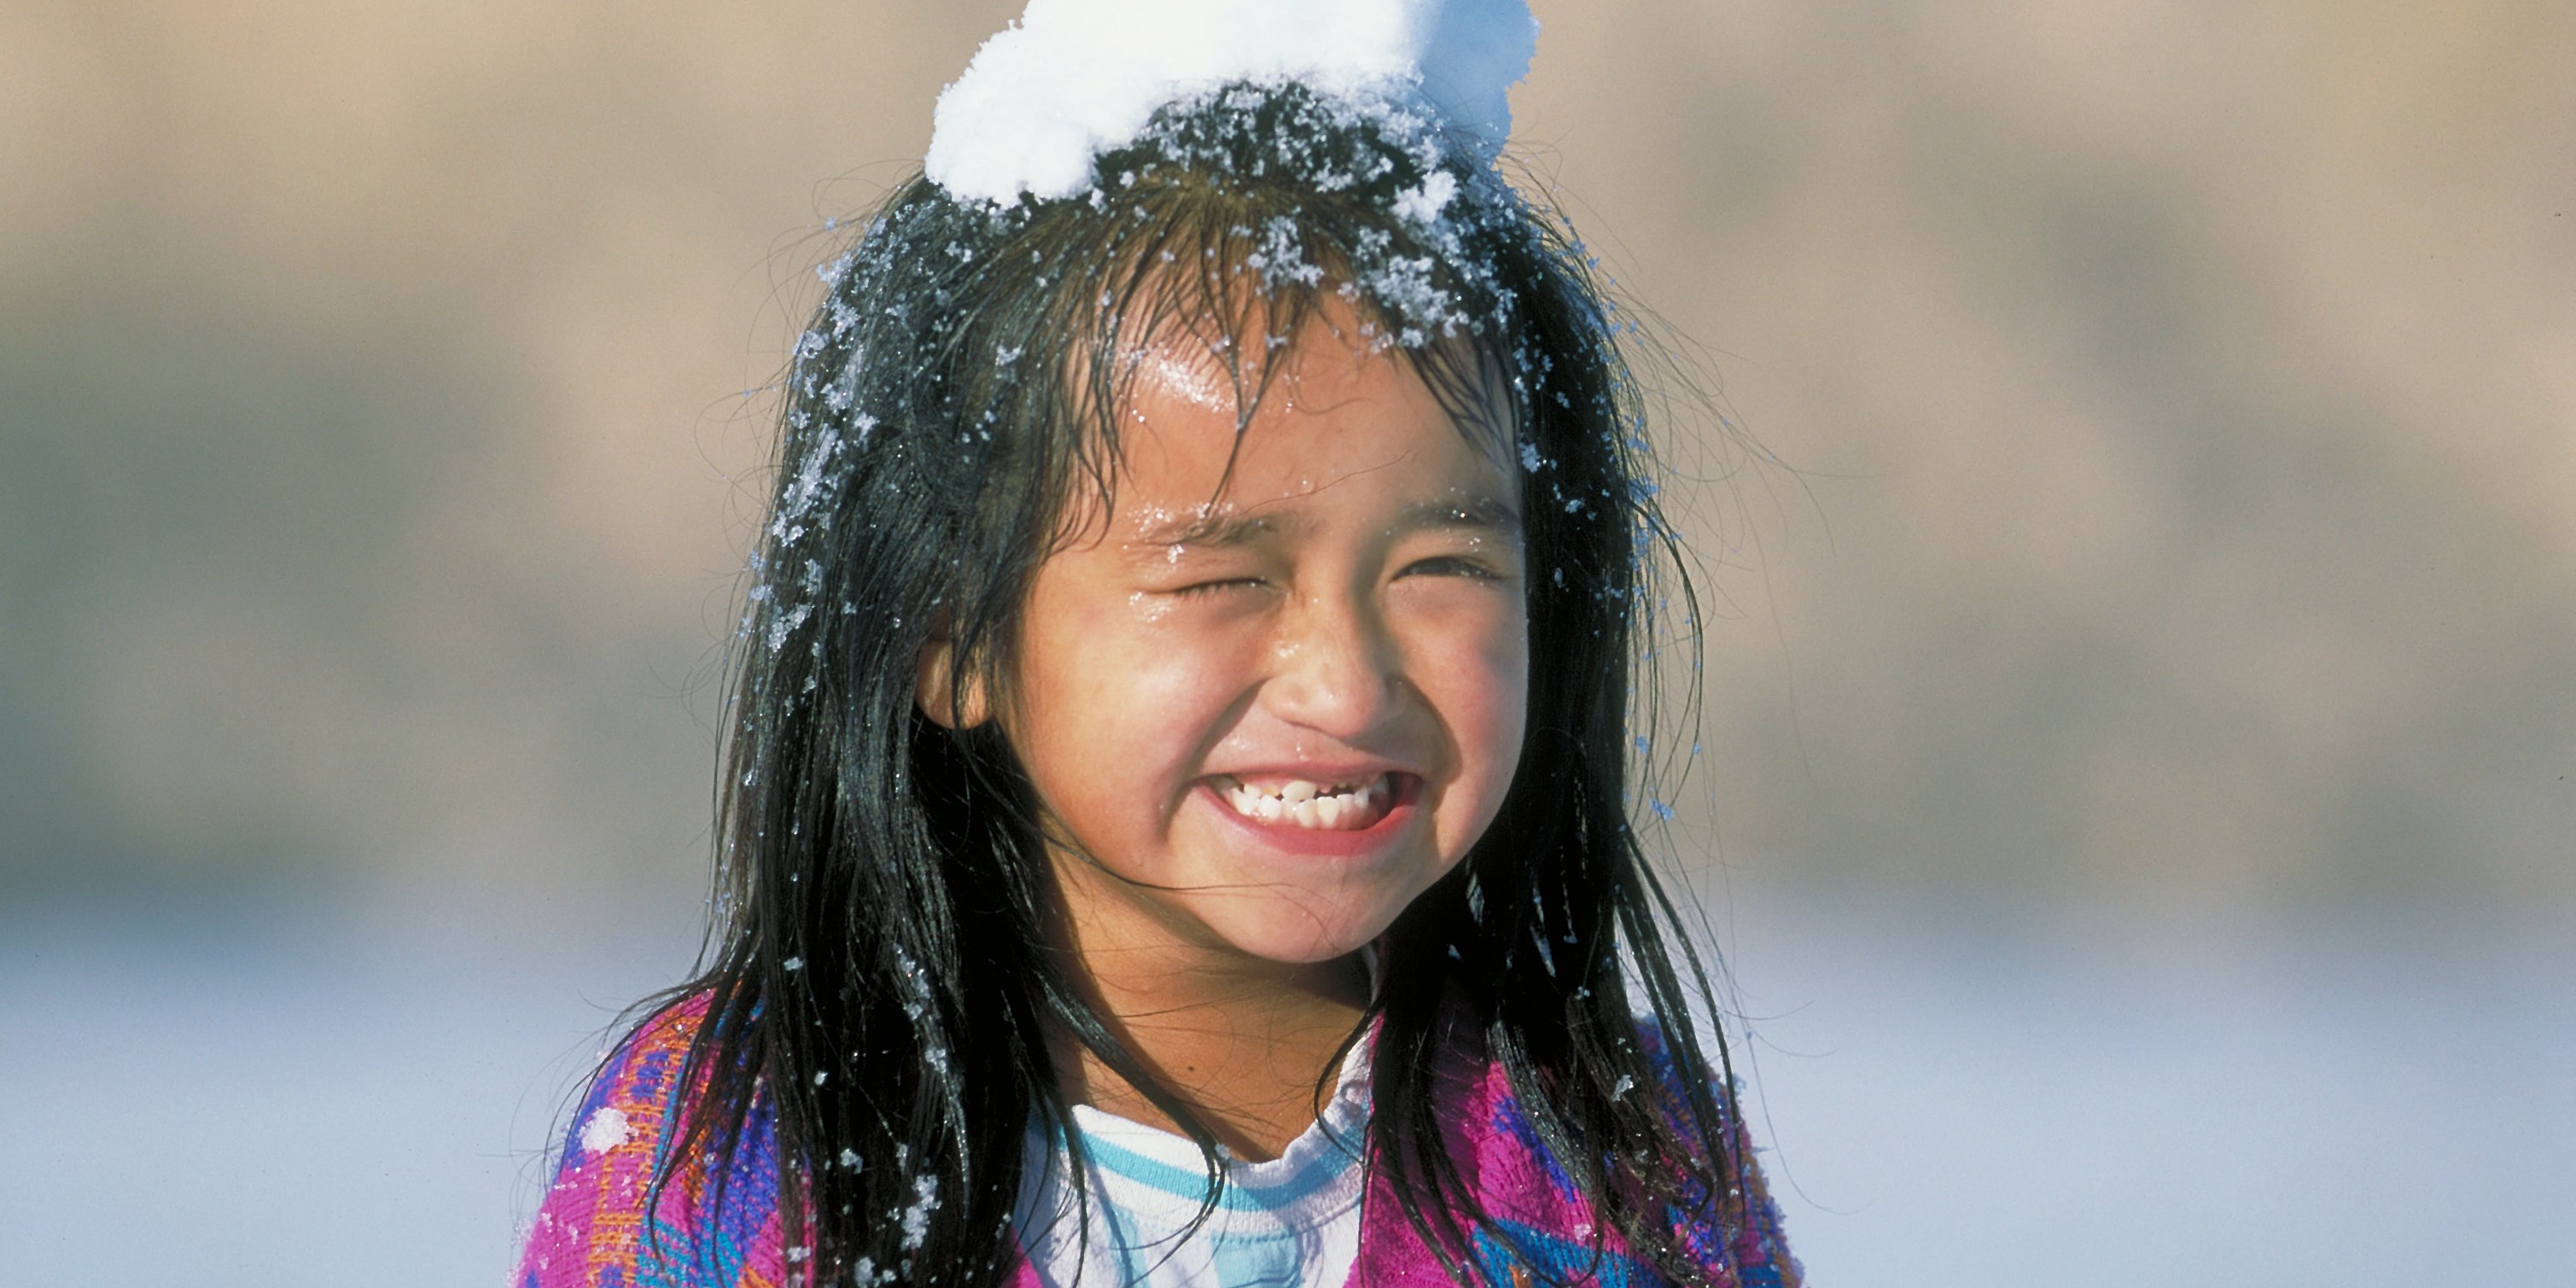 A girl plays outside in the snow